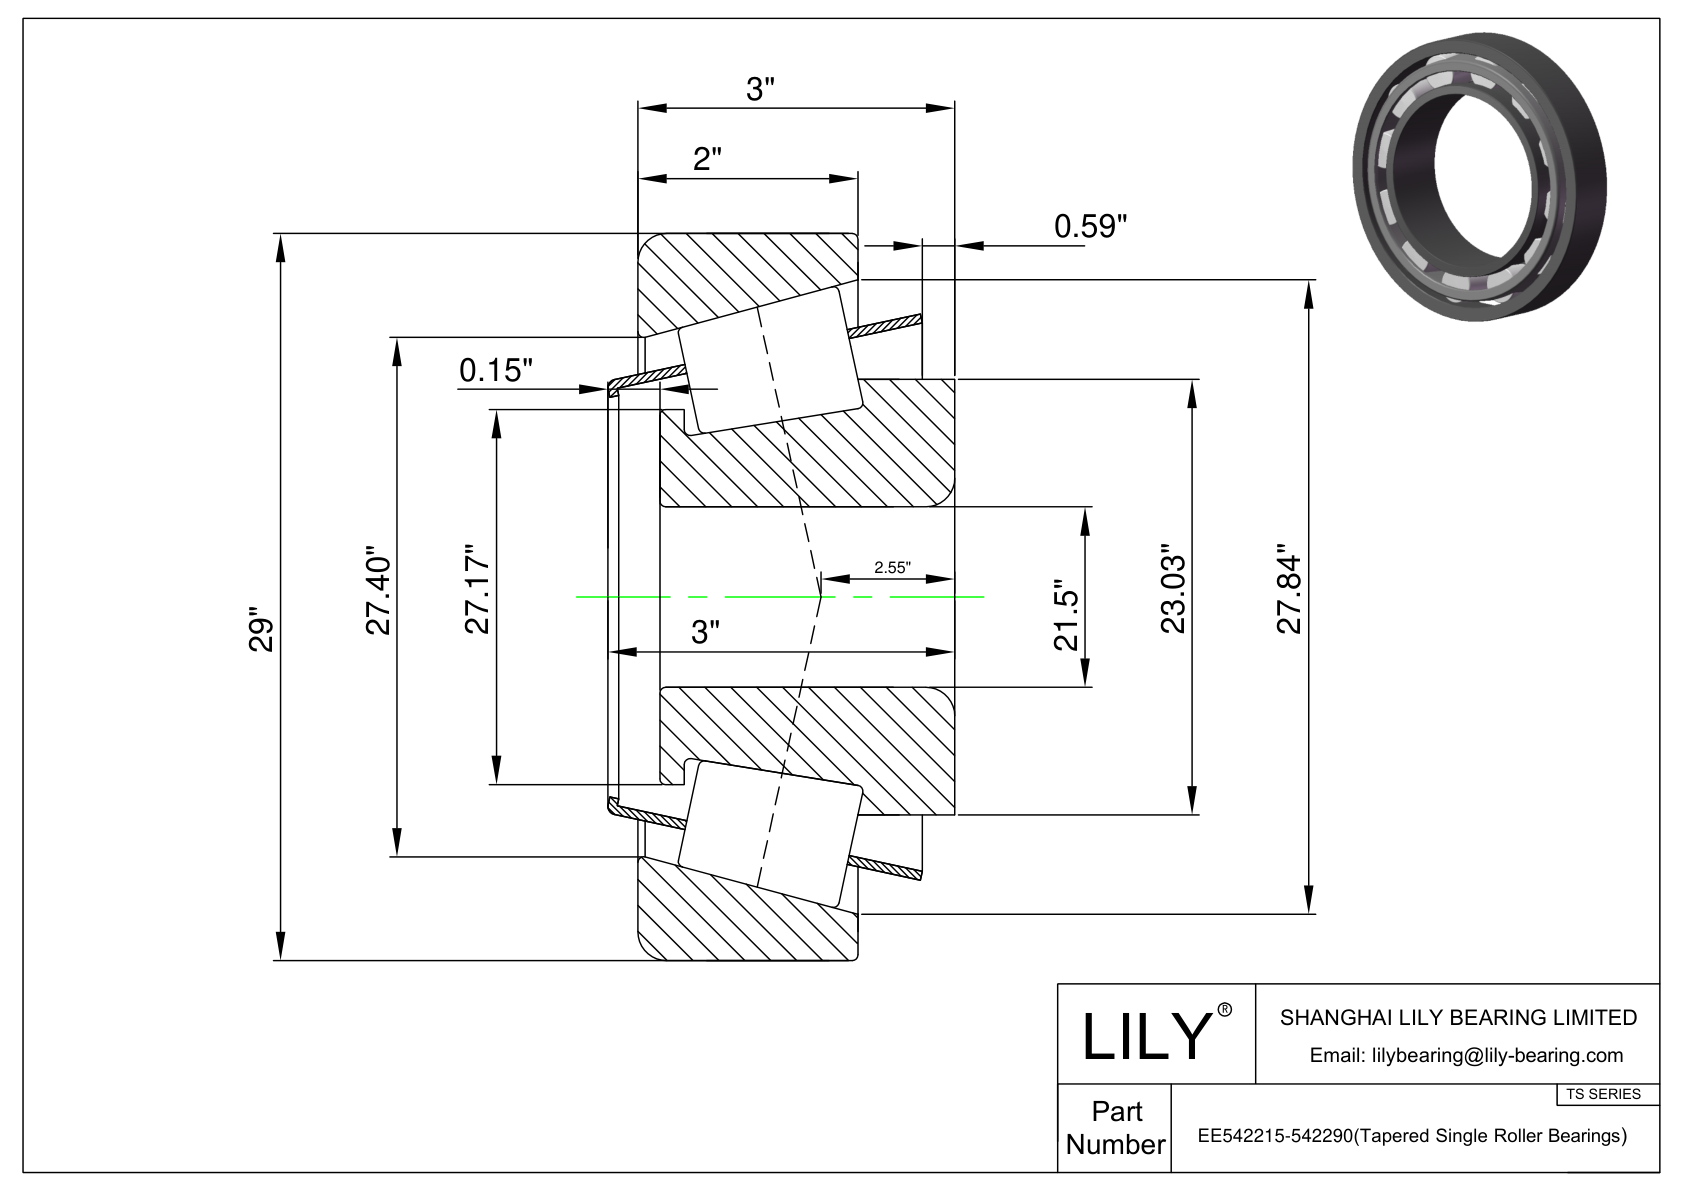 EE542215-542290 TS (Tapered Single Roller Bearings) (Imperial) cad drawing